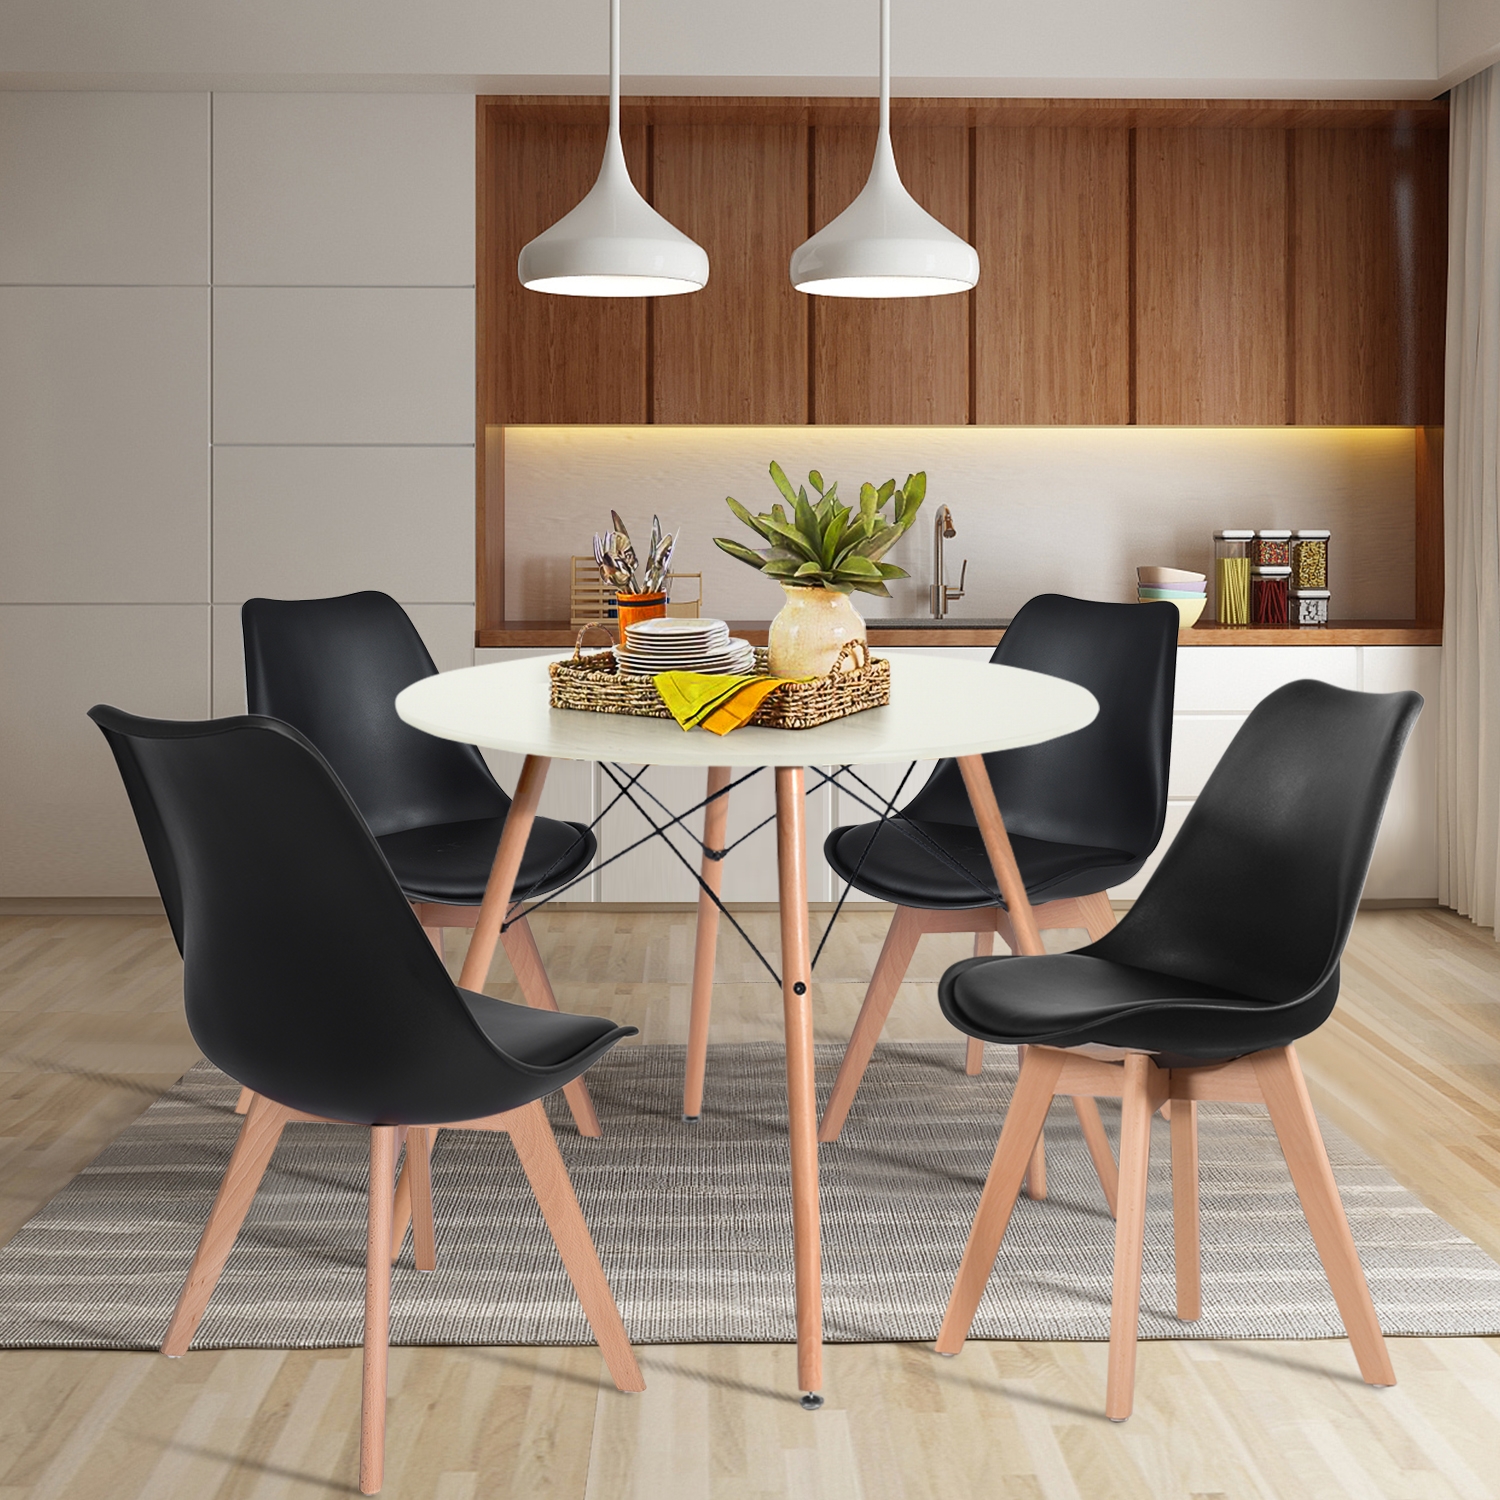 Dining Chairs,Set of 4 Eames Style PU Leather Solid Wood Beech Legs,Black-Boyel Living